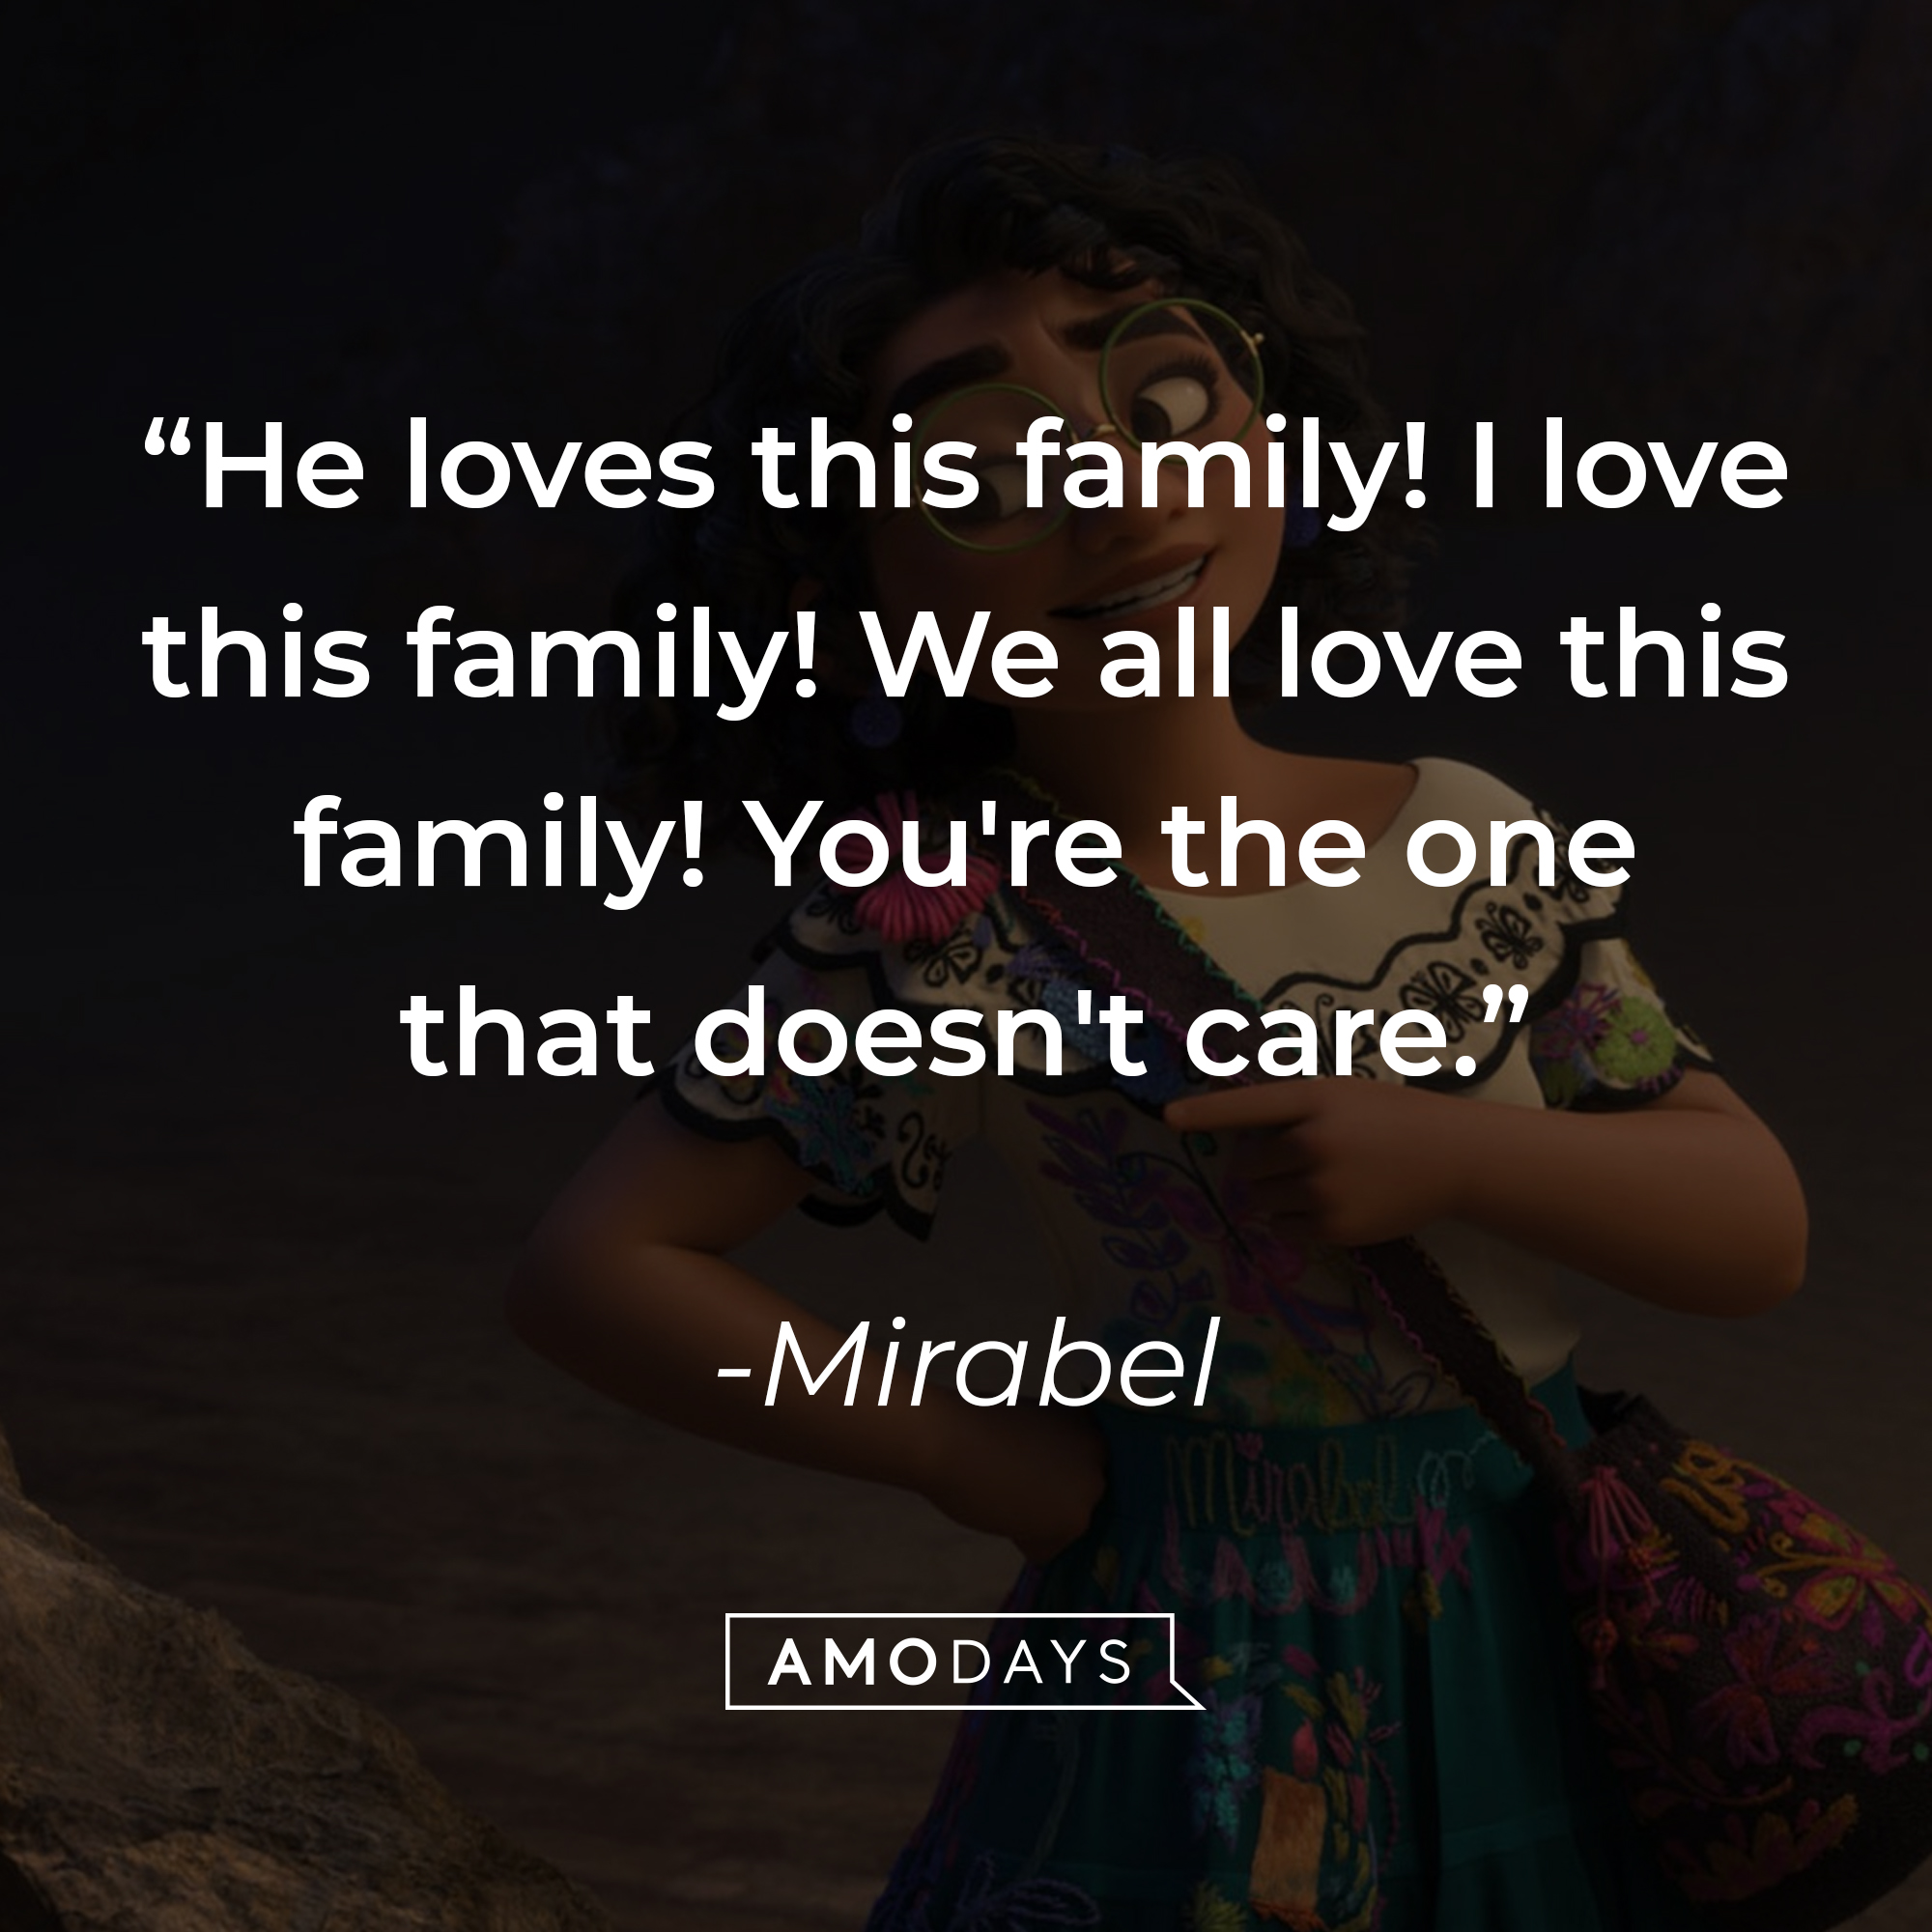 Mirabel's quote: “He loves this family! I love this family! We all love this family! You're the one that doesn't care.” | Source: Facebook.com/EncantoMovie